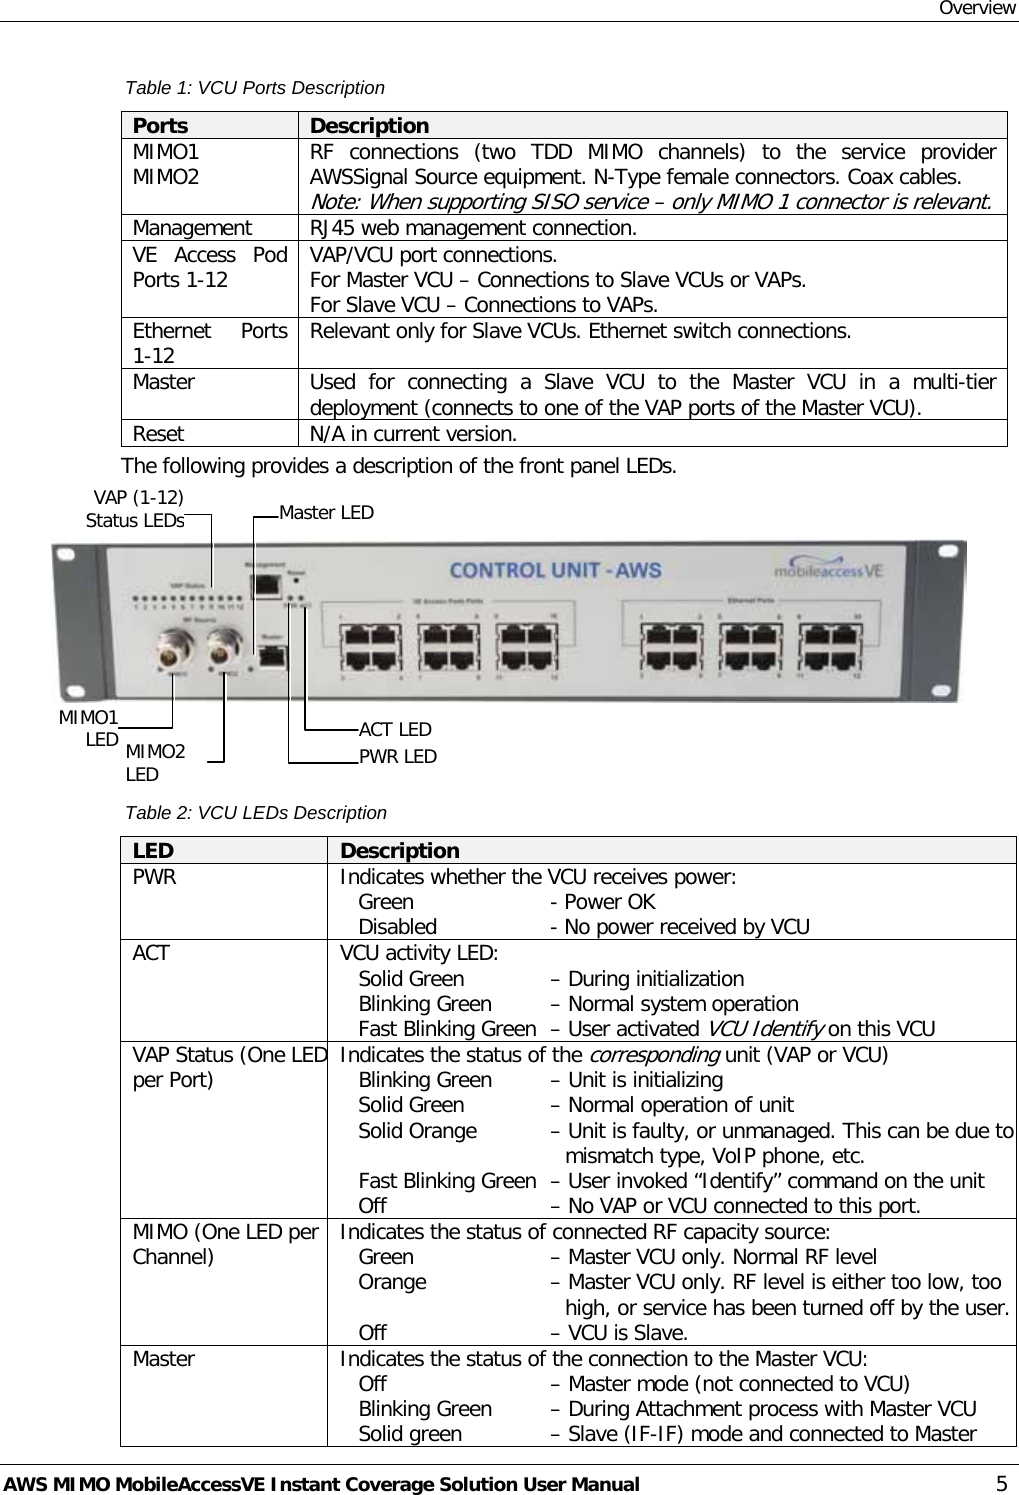 Overview AWS MIMO MobileAccessVE Instant Coverage Solution User Manual  5 Table 1: VCU Ports Description Ports Description MIMO1 MIMO2  RF connections (two  TDD MIMO channels) to the service provider AWSSignal Source equipment. N-Type female connectors. Coax cables. Note: When supporting SISO service – only MIMO 1 connector is relevant. Management RJ45 web management connection. VE Access Pod Ports 1-12   VAP/VCU port connections.  For Master VCU – Connections to Slave VCUs or VAPs. For Slave VCU – Connections to VAPs. Ethernet Ports 1-12  Relevant only for Slave VCUs. Ethernet switch connections.  Master Used for connecting a Slave VCU to the Master VCU in a multi-tier deployment (connects to one of the VAP ports of the Master VCU). Reset  N/A in current version. The following provides a description of the front panel LEDs.     Table 2: VCU LEDs Description LED Description PWR  Indicates whether the VCU receives power: Green   - Power OK  Disabled   - No power received by VCU ACT VCU activity LED: Solid Green   – During initialization  Blinking Green   – Normal system operation Fast Blinking Green  – User activated VCU Identify on this VCU VAP Status (One LED per Port)  Indicates the status of the corresponding unit (VAP or VCU) Blinking Green   – Unit is initializing Solid Green   – Normal operation of unit Solid Orange   – Unit is faulty, or unmanaged. This can be due to mismatch type, VoIP phone, etc. Fast Blinking Green  – User invoked “Identify” command on the unit Off   – No VAP or VCU connected to this port. MIMO (One LED per Channel)  Indicates the status of connected RF capacity source:  Green   – Master VCU only. Normal RF level  Orange     – Master VCU only. RF level is either too low, too high, or service has been turned off by the user.  Off   – VCU is Slave. Master Indicates the status of the connection to the Master VCU:  Off   – Master mode (not connected to VCU) Blinking Green   – During Attachment process with Master VCU Solid green   – Slave (IF-IF) mode and connected to Master PWR LED   ACT LED   VAP (1-12) Status LEDs    Master LED   MIMO1 LED   MIMO2 LED   